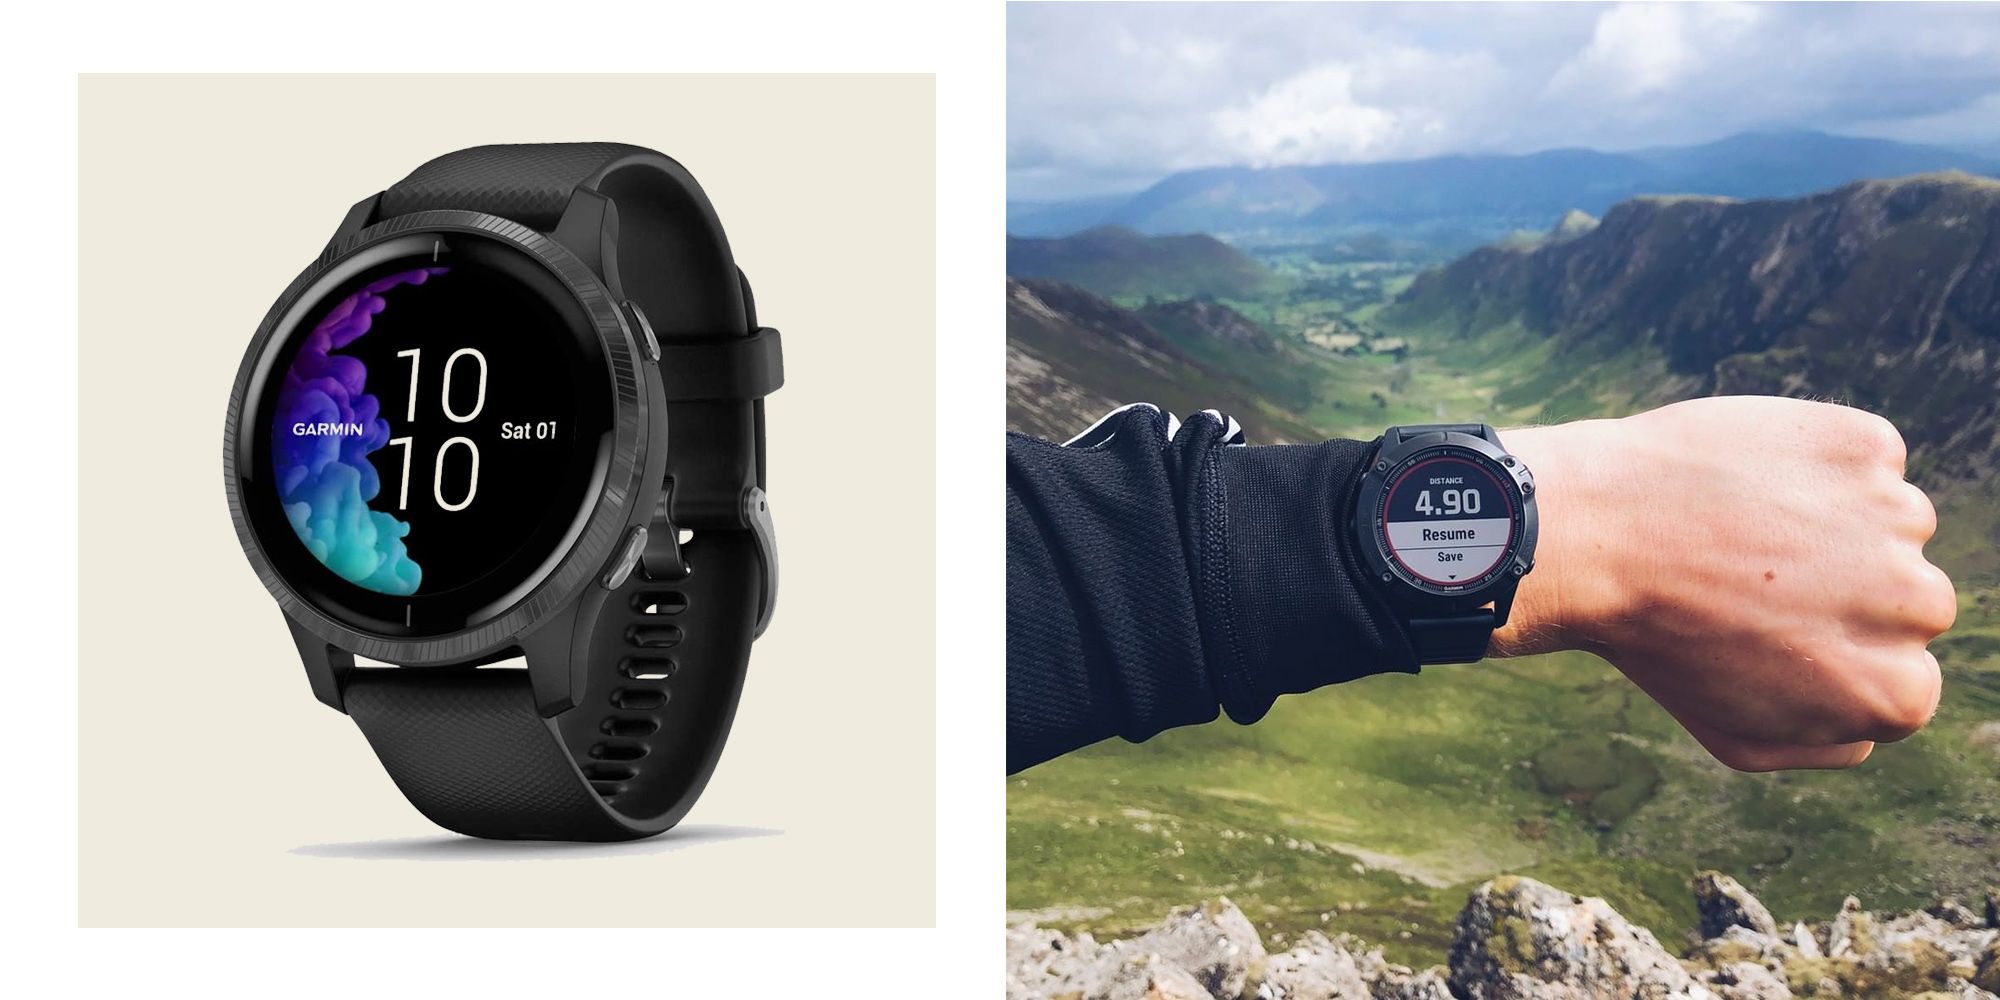 Best Garmin Watch: How to Find the Perfect Smartwatch or Fitness